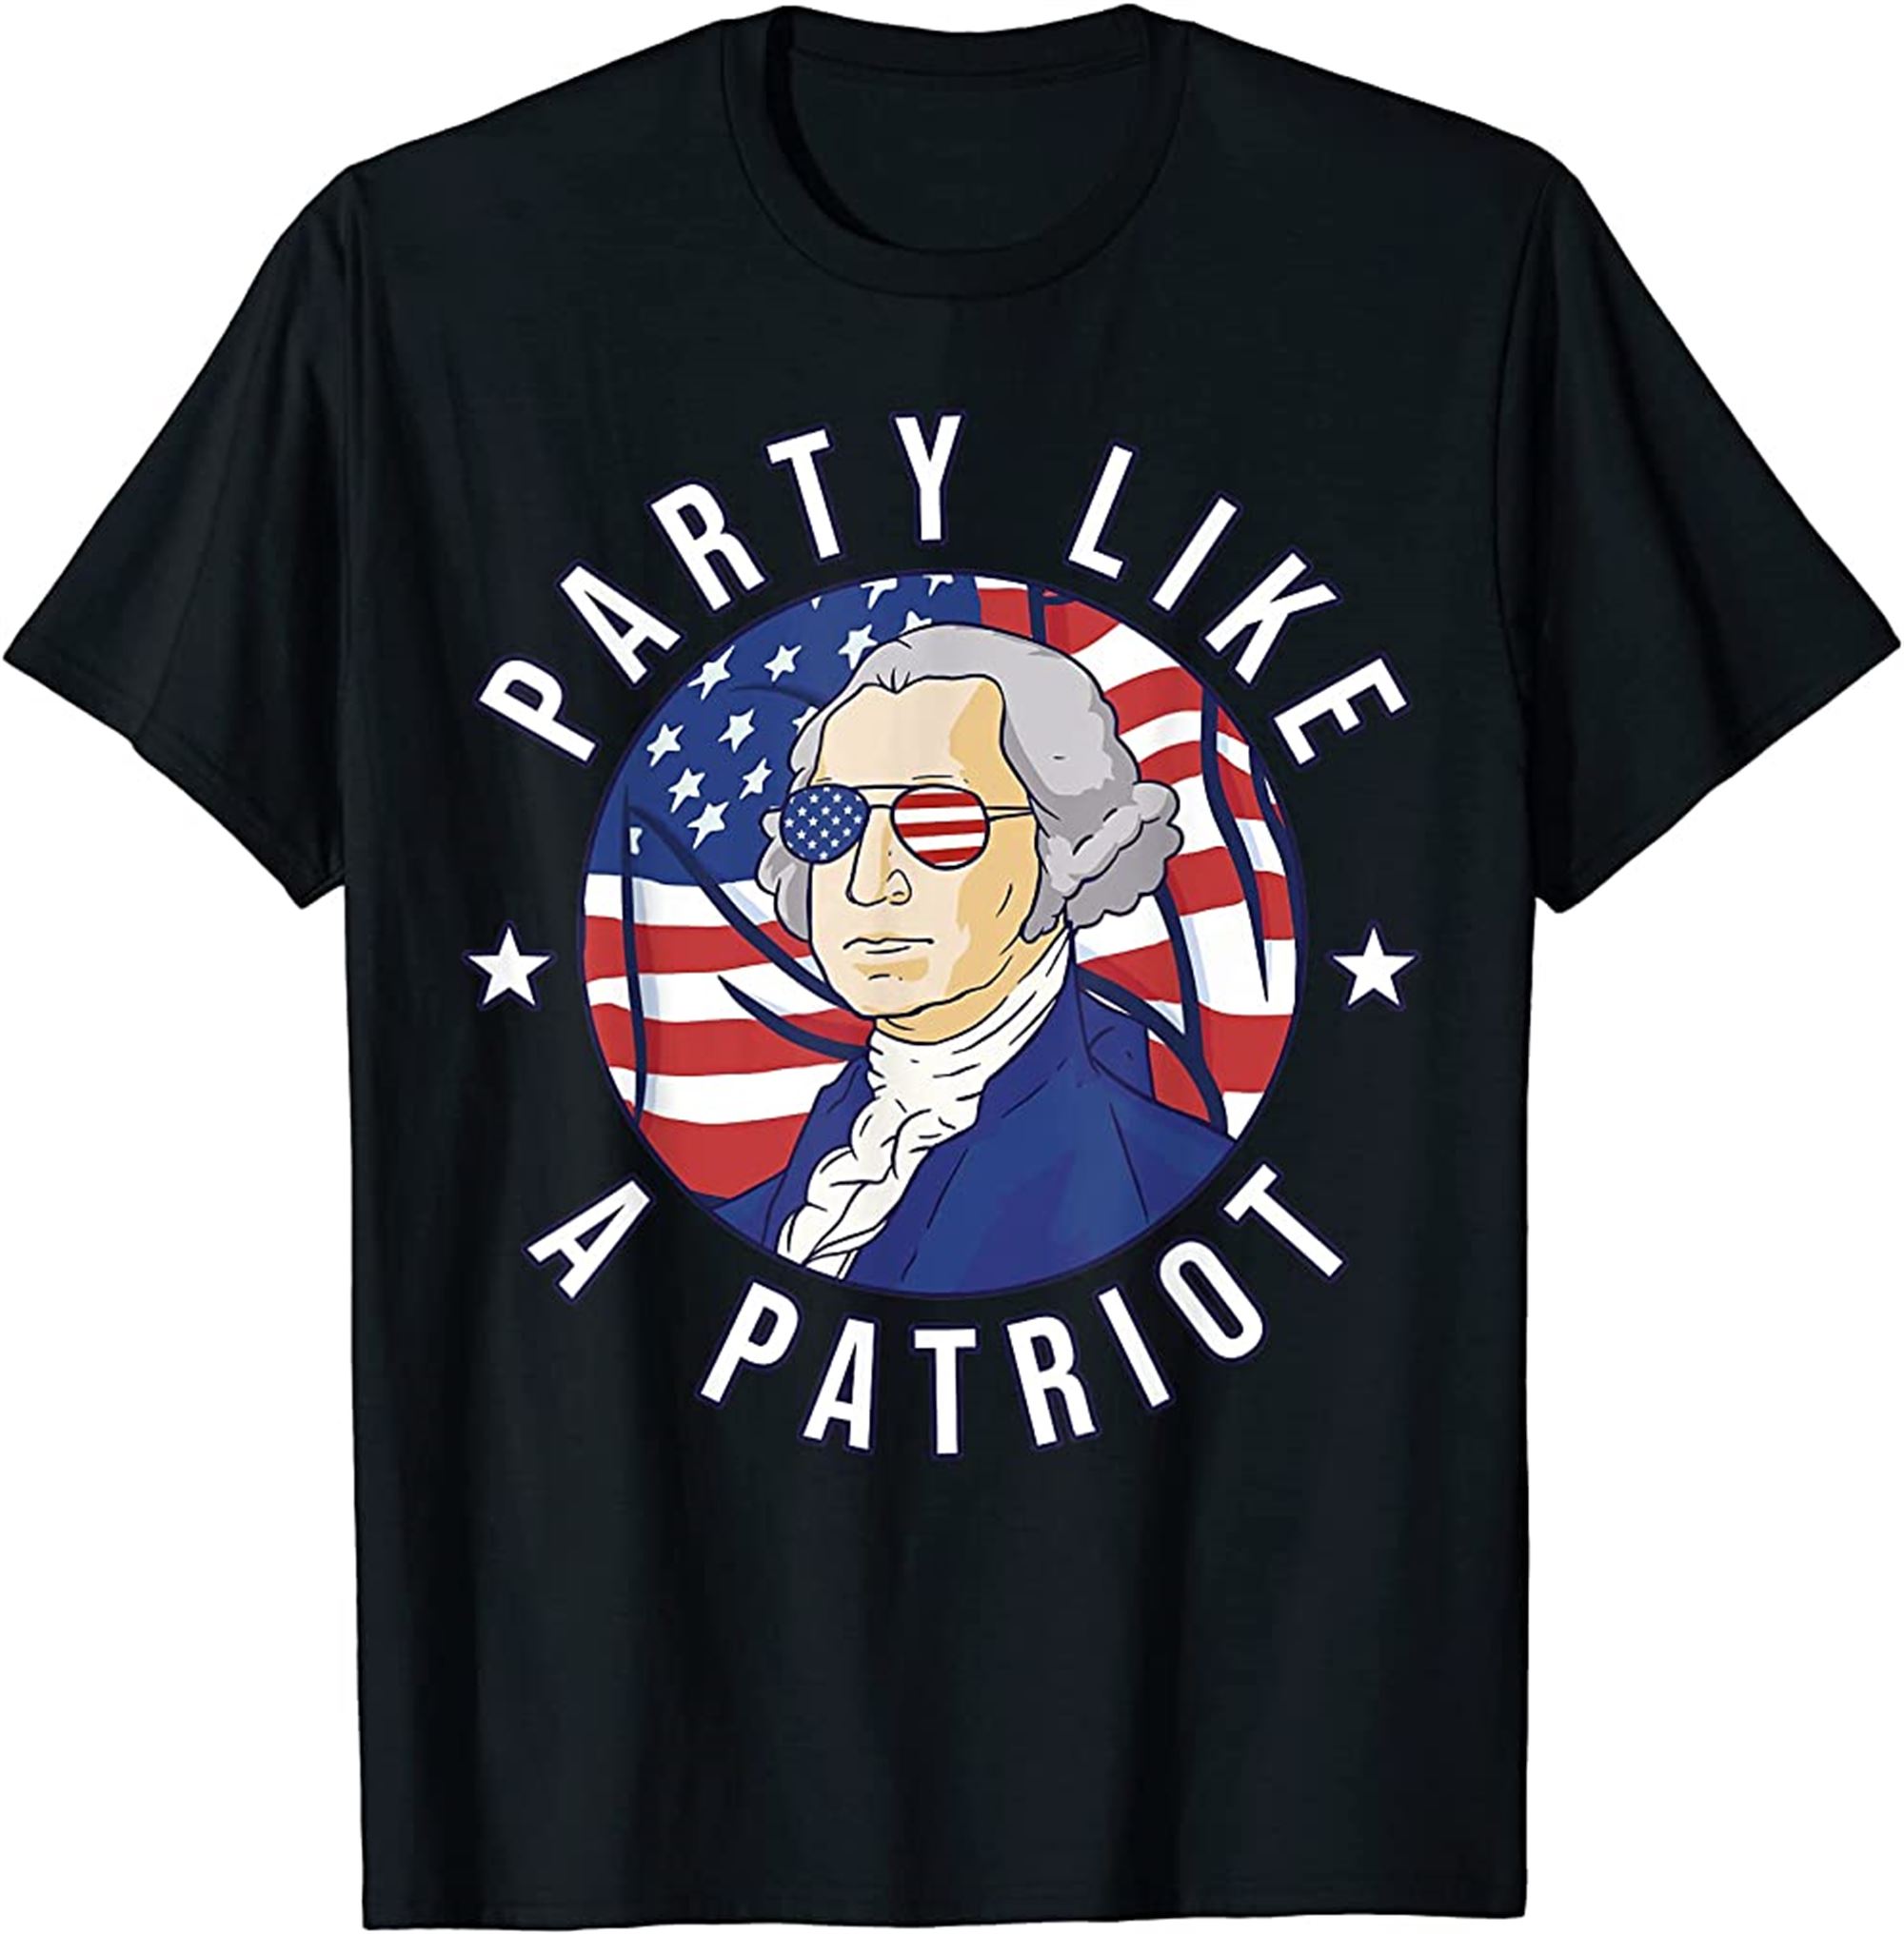 Party Like A Patriot 4th Of July T-shirt Full Size Up To 5xl